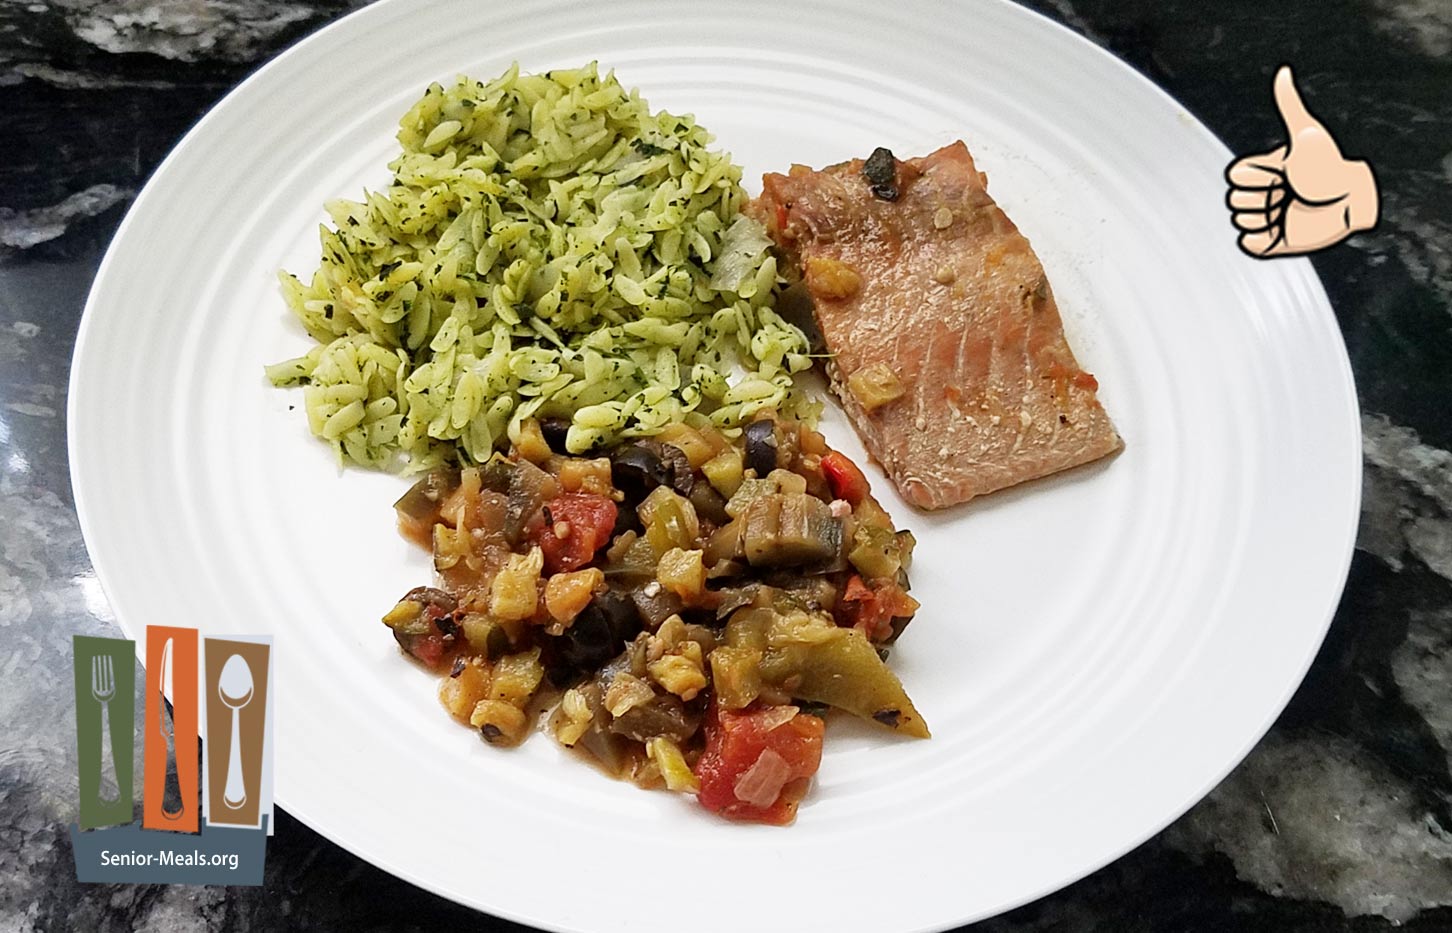 MK Signature Meal - Salmon Caponata with Orzo and Spinach - $14